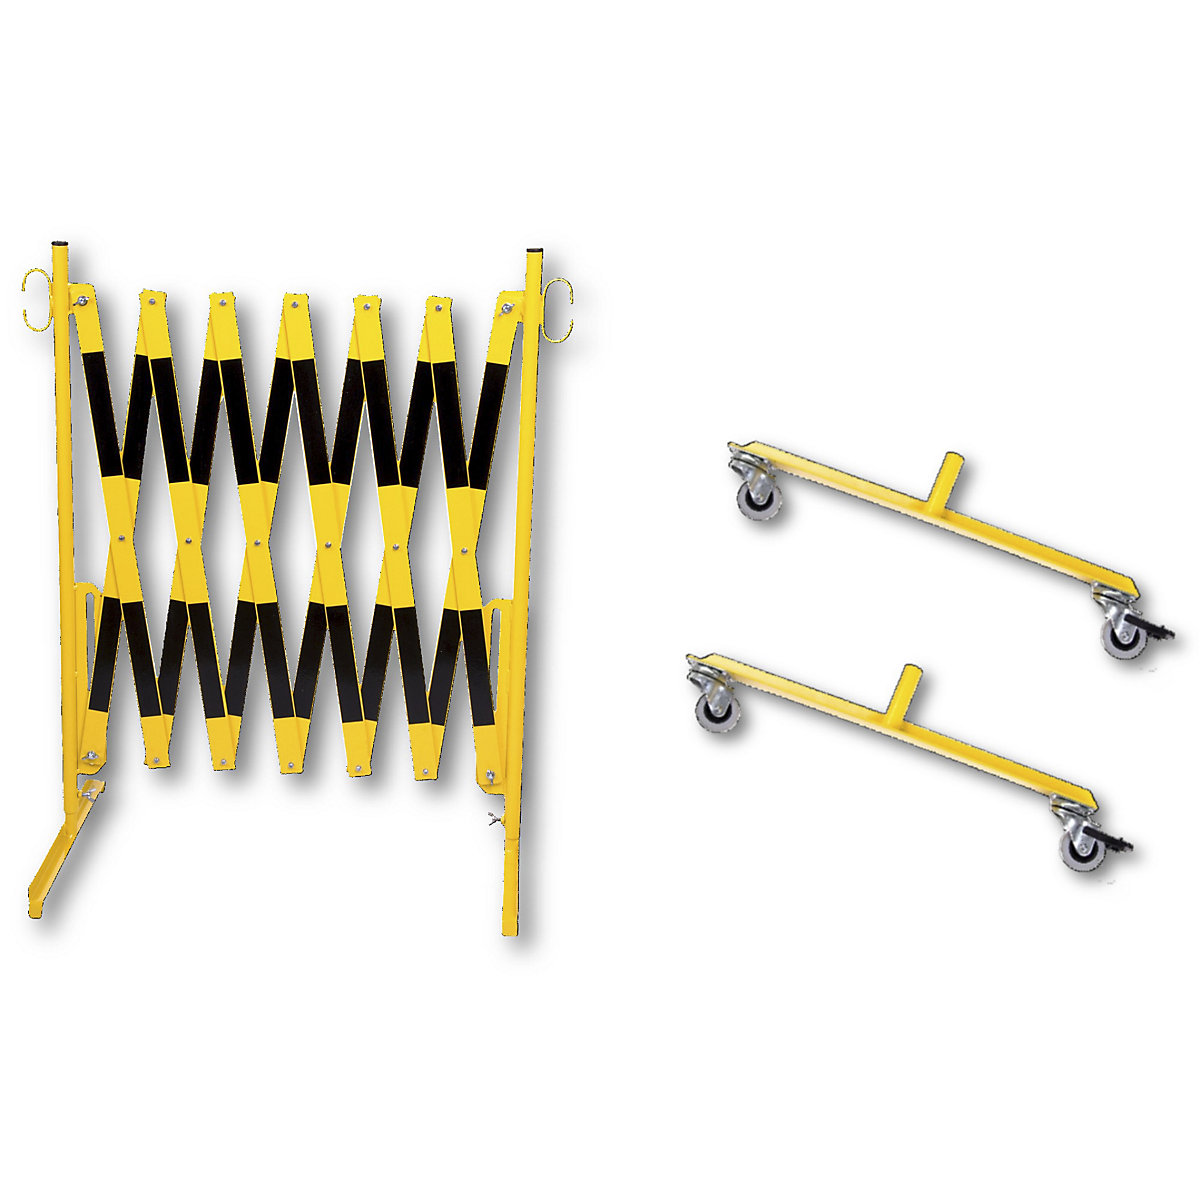 Expanding barrier, with 2 feet with castors, yellow / black, max. length 4000 mm